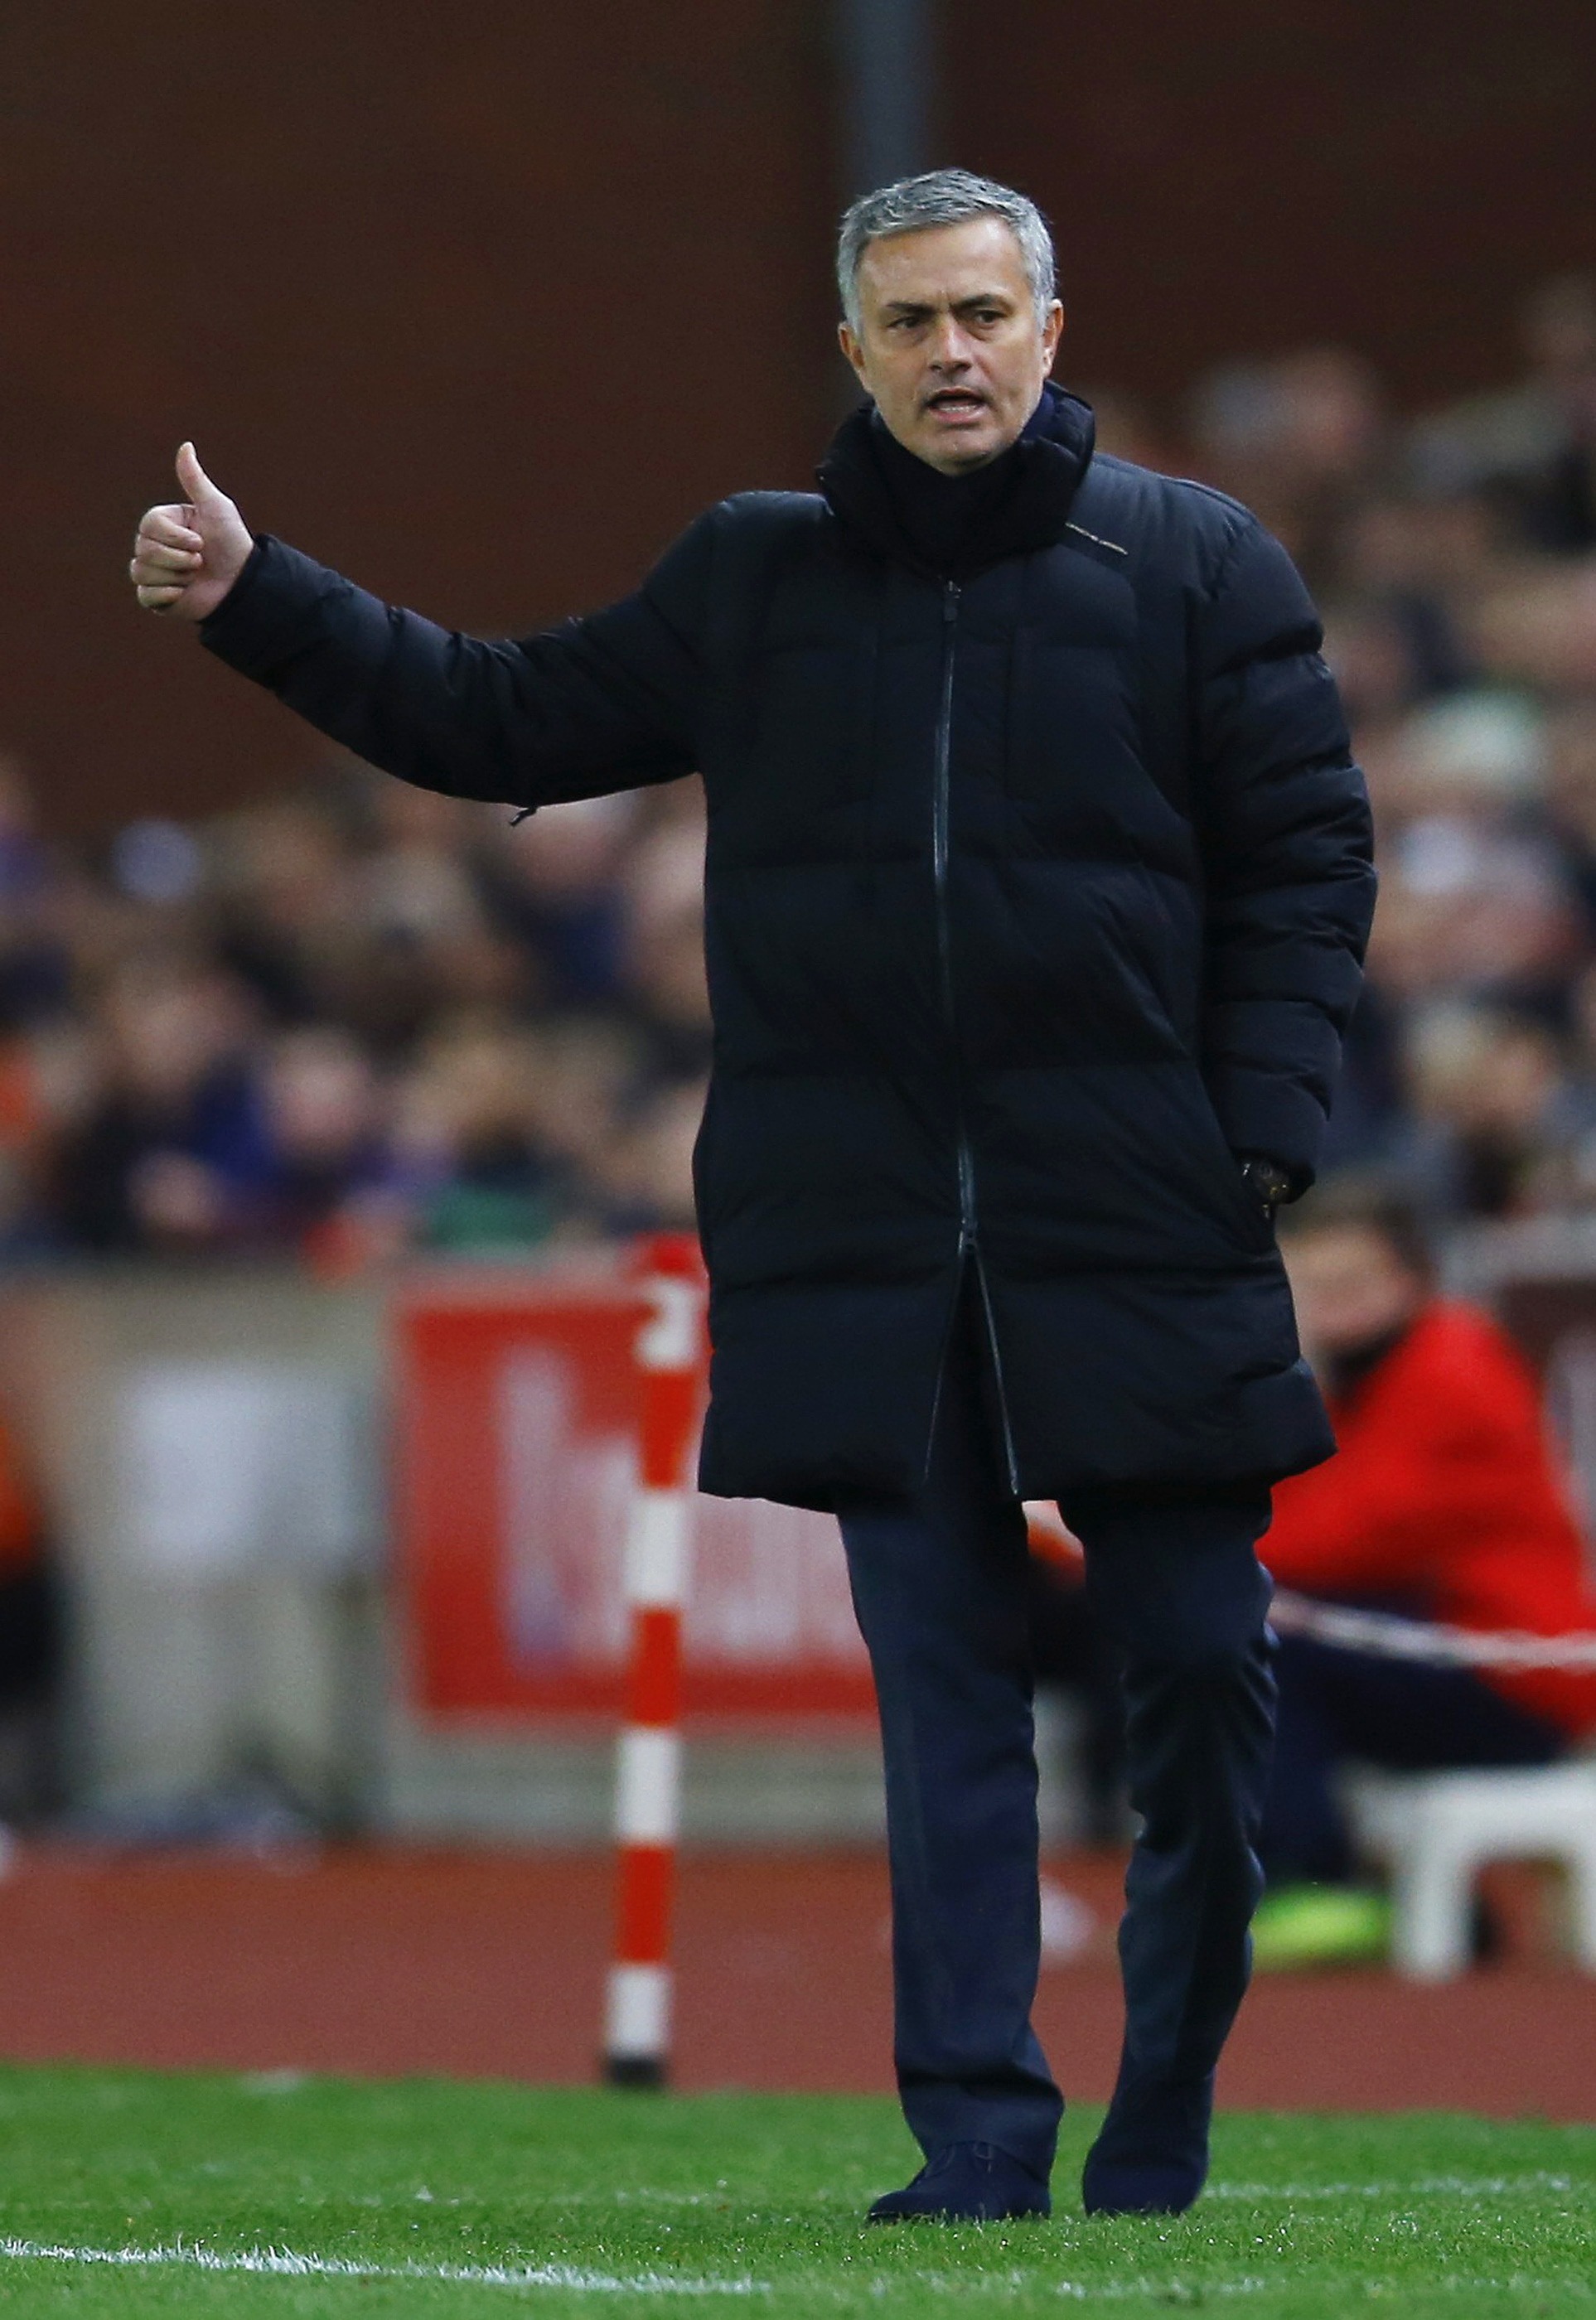 Chelsea manager Jose Mourinho reacts during their English Premier League soccer match against Stoke City at the Britannia Stadium in Stoke-on-Trent